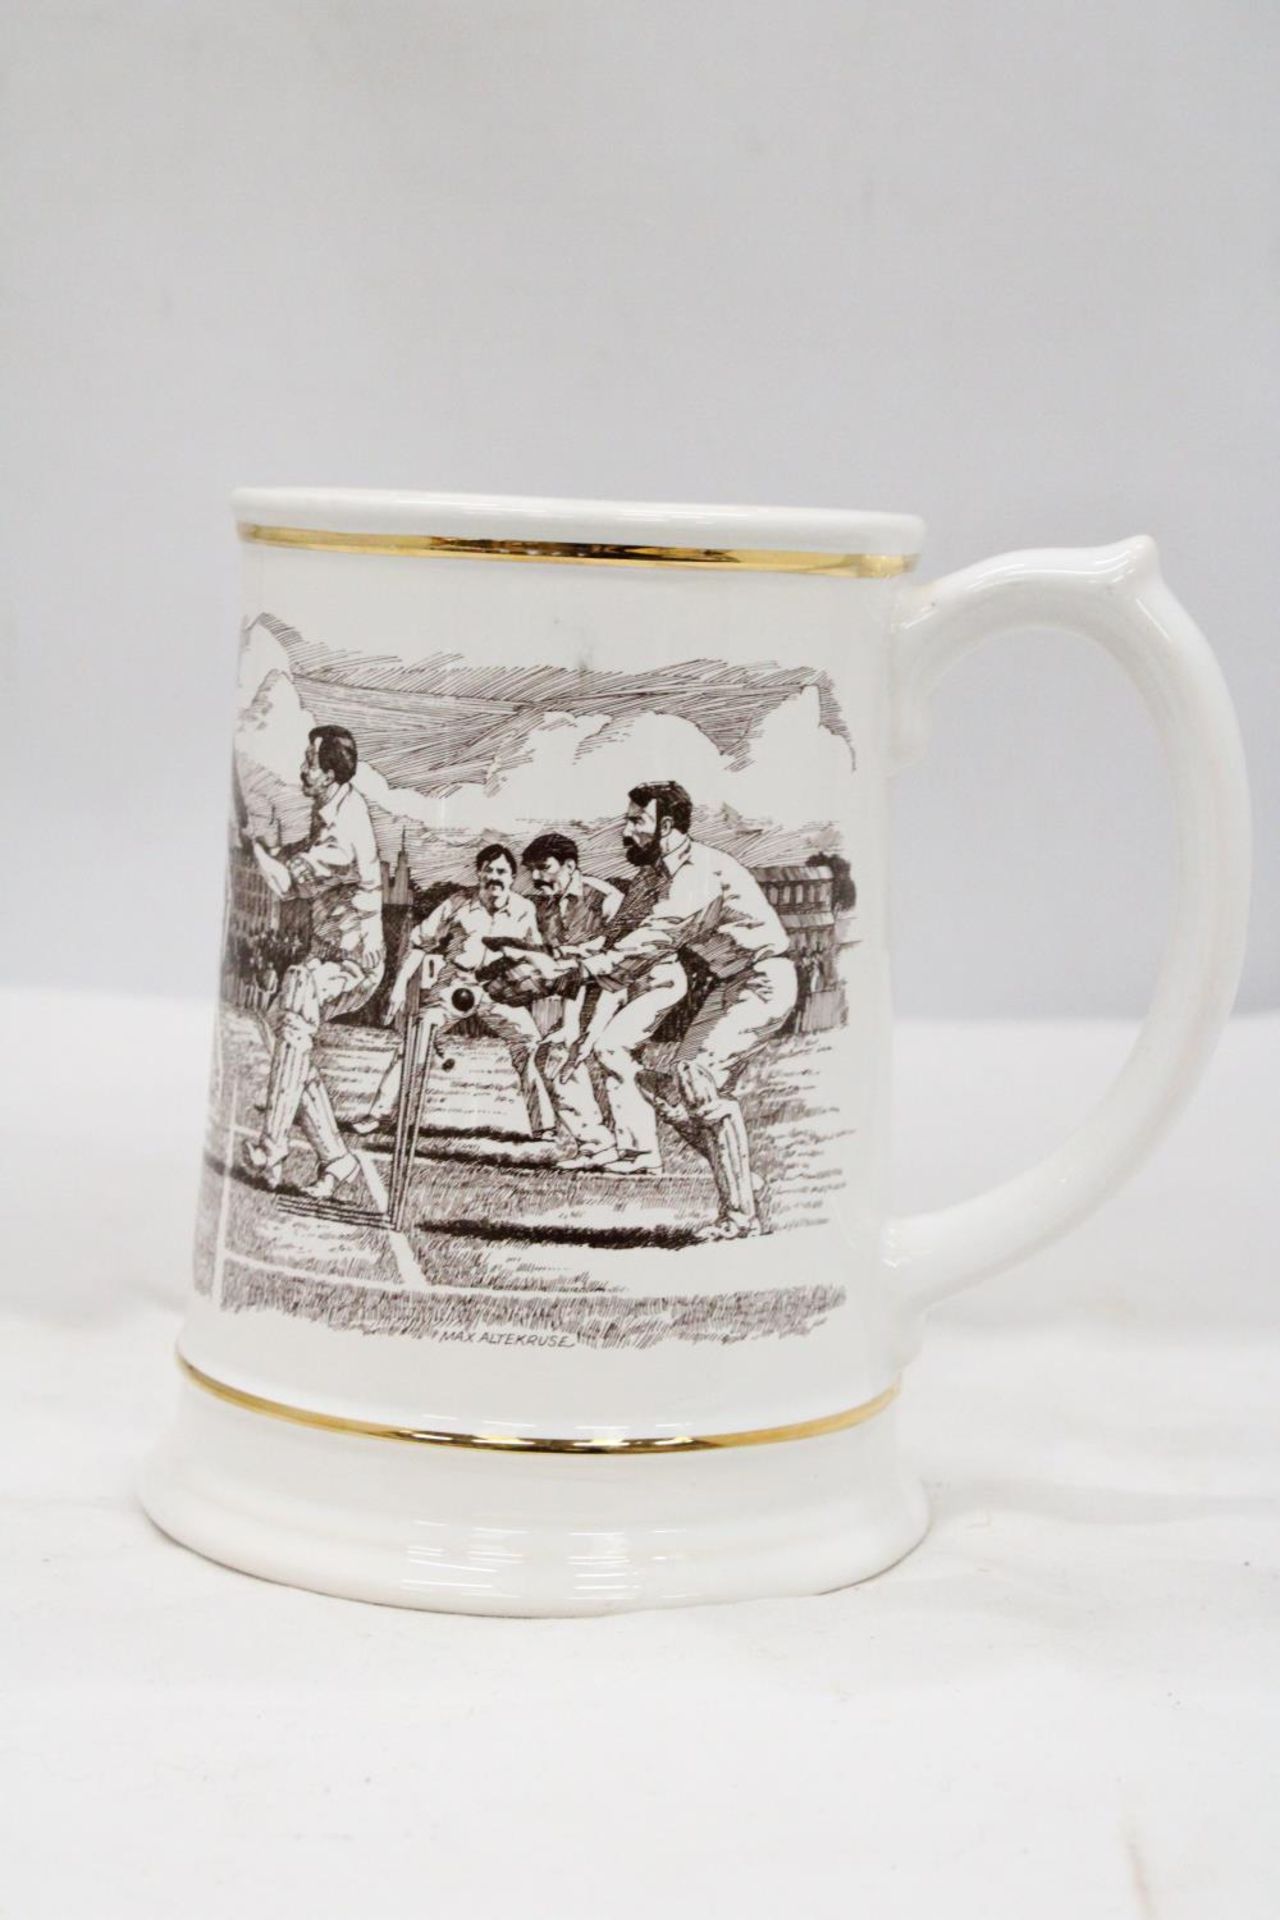 A LARGE LIMITED EDITION FRANKLIN PORCELAIN ASHES TANKARD 1882-1982 - APPROXIMATELY 16CM HIGH